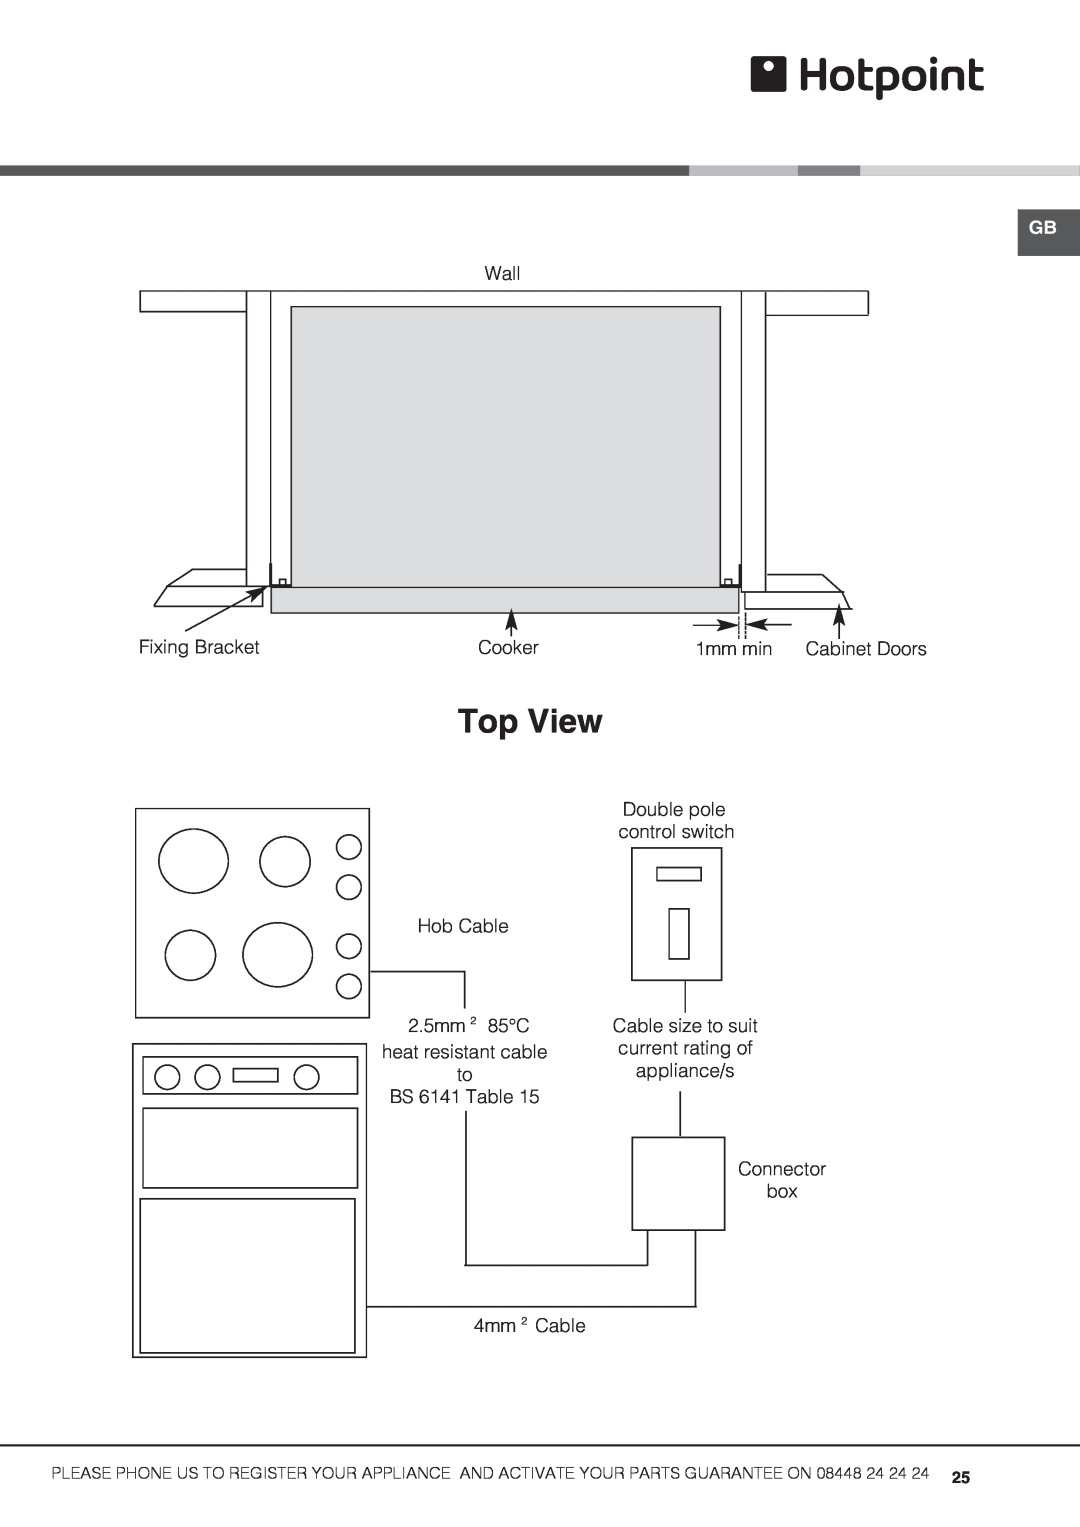 Hotpoint UHS53X S manual Top View, Wall, Fixing Bracket, Cooker, 1mm min, Double pole control switch Hob Cable, 2.5mm 2 85C 